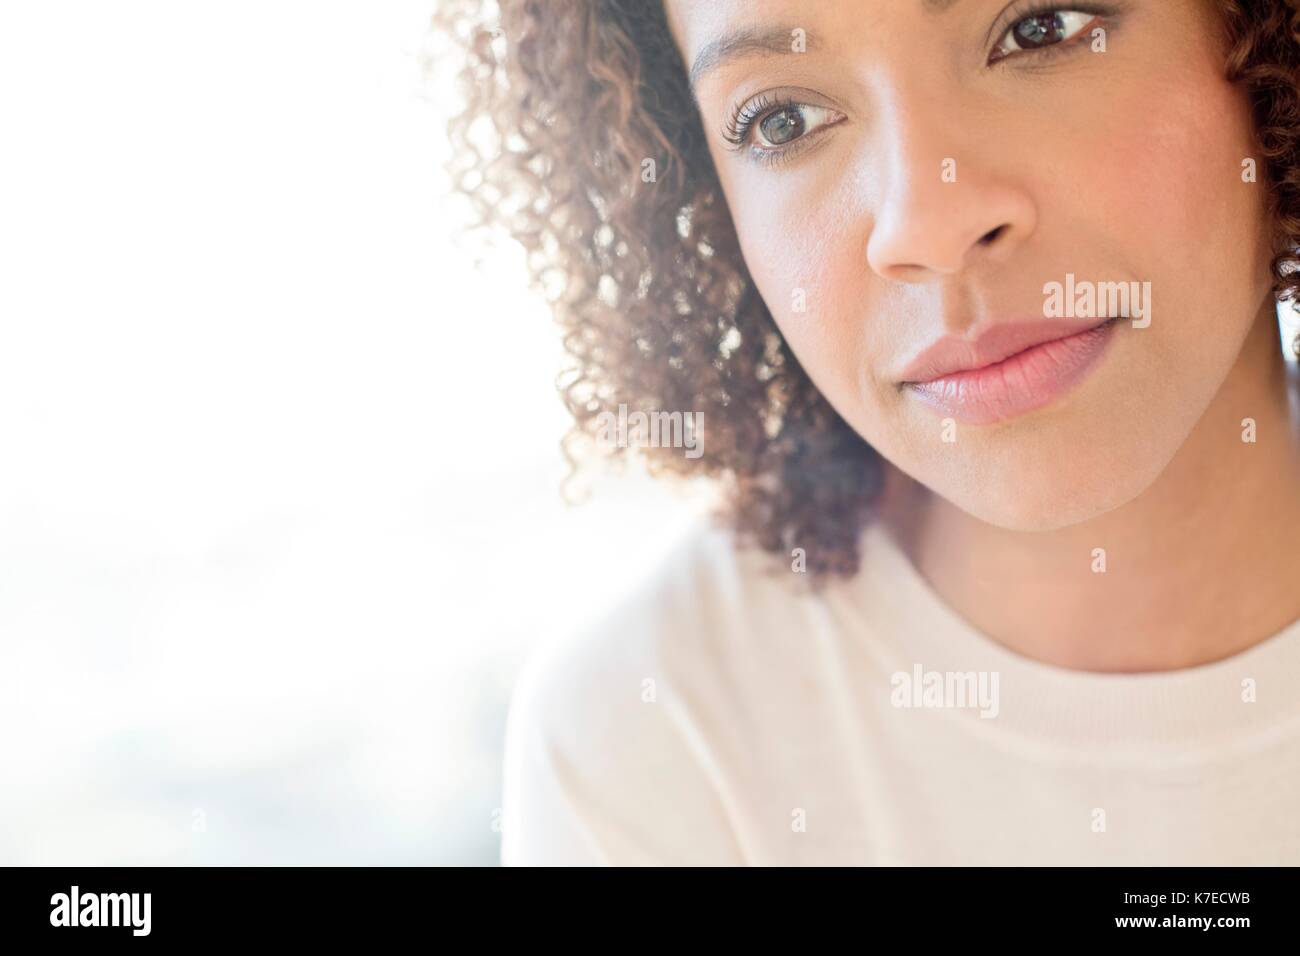 Mid adult woman looking away. Stock Photo